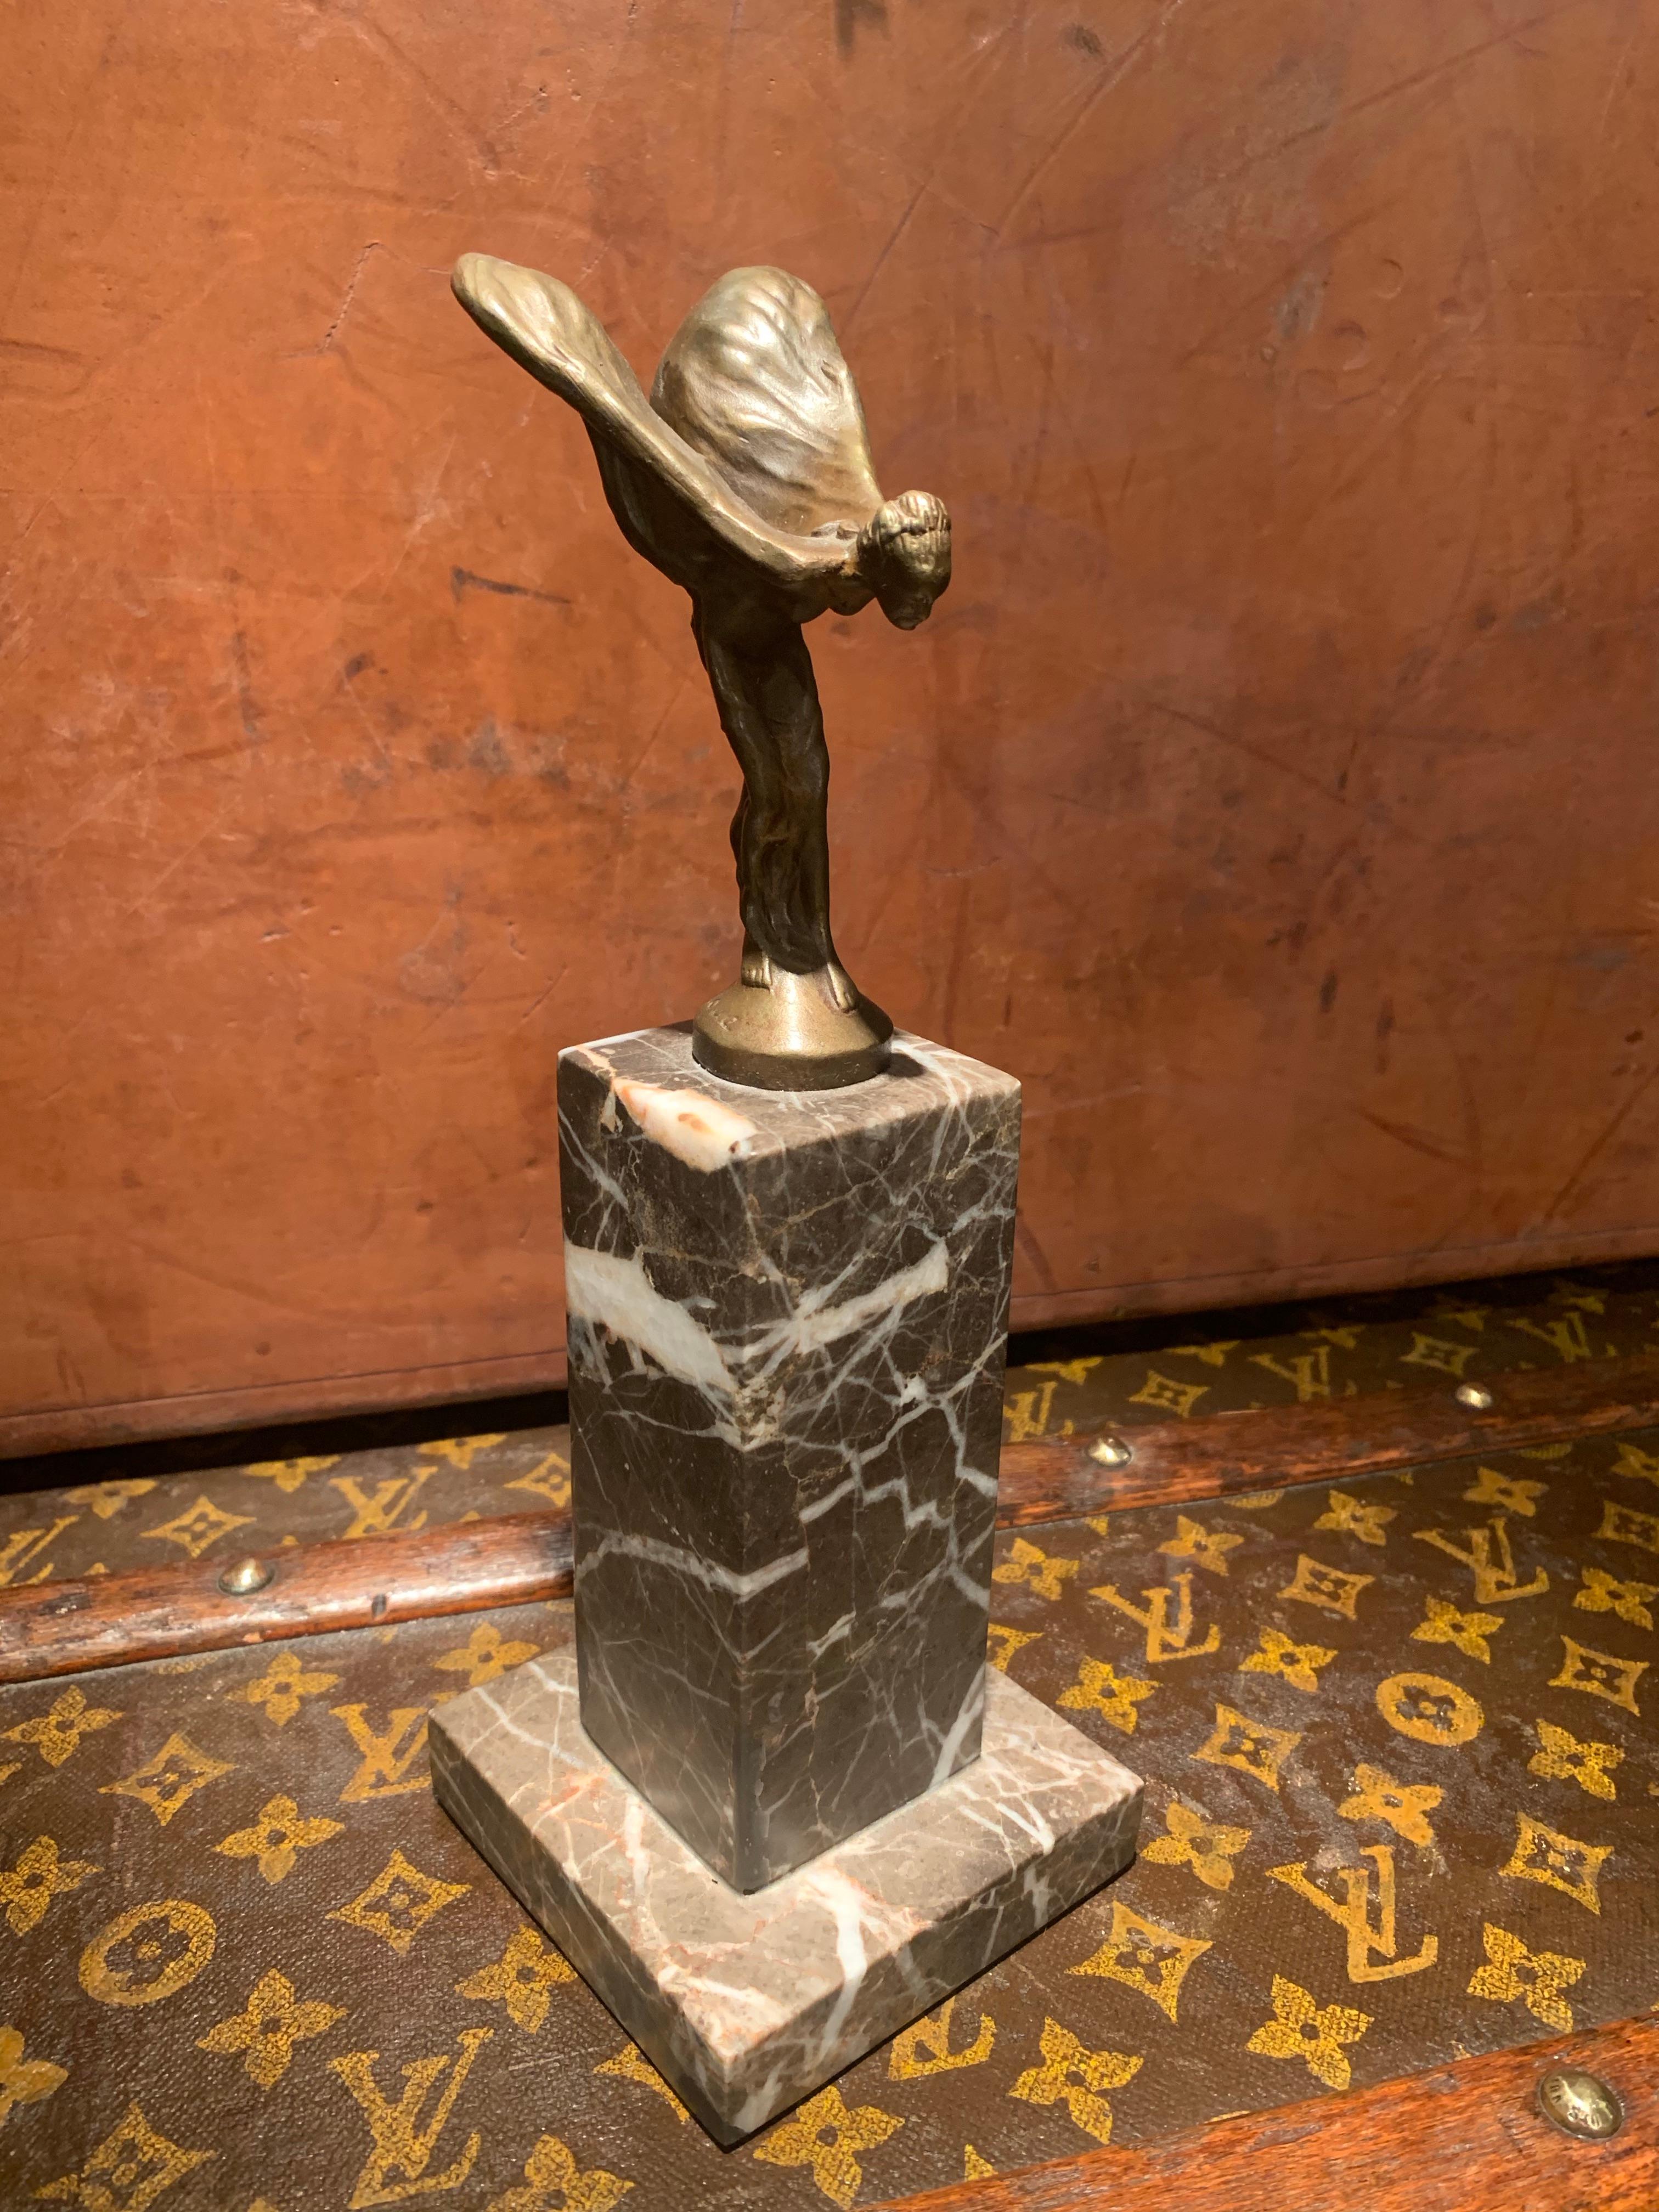 Small statue in Bronze which represent the Spirit of Ecstasy made by Jean Patoue (1887-1936), which stand on a grey Marble base.
This object could be display as a decoration piece on a desk or shelves.

Condition:
The Bronze has a beautiful